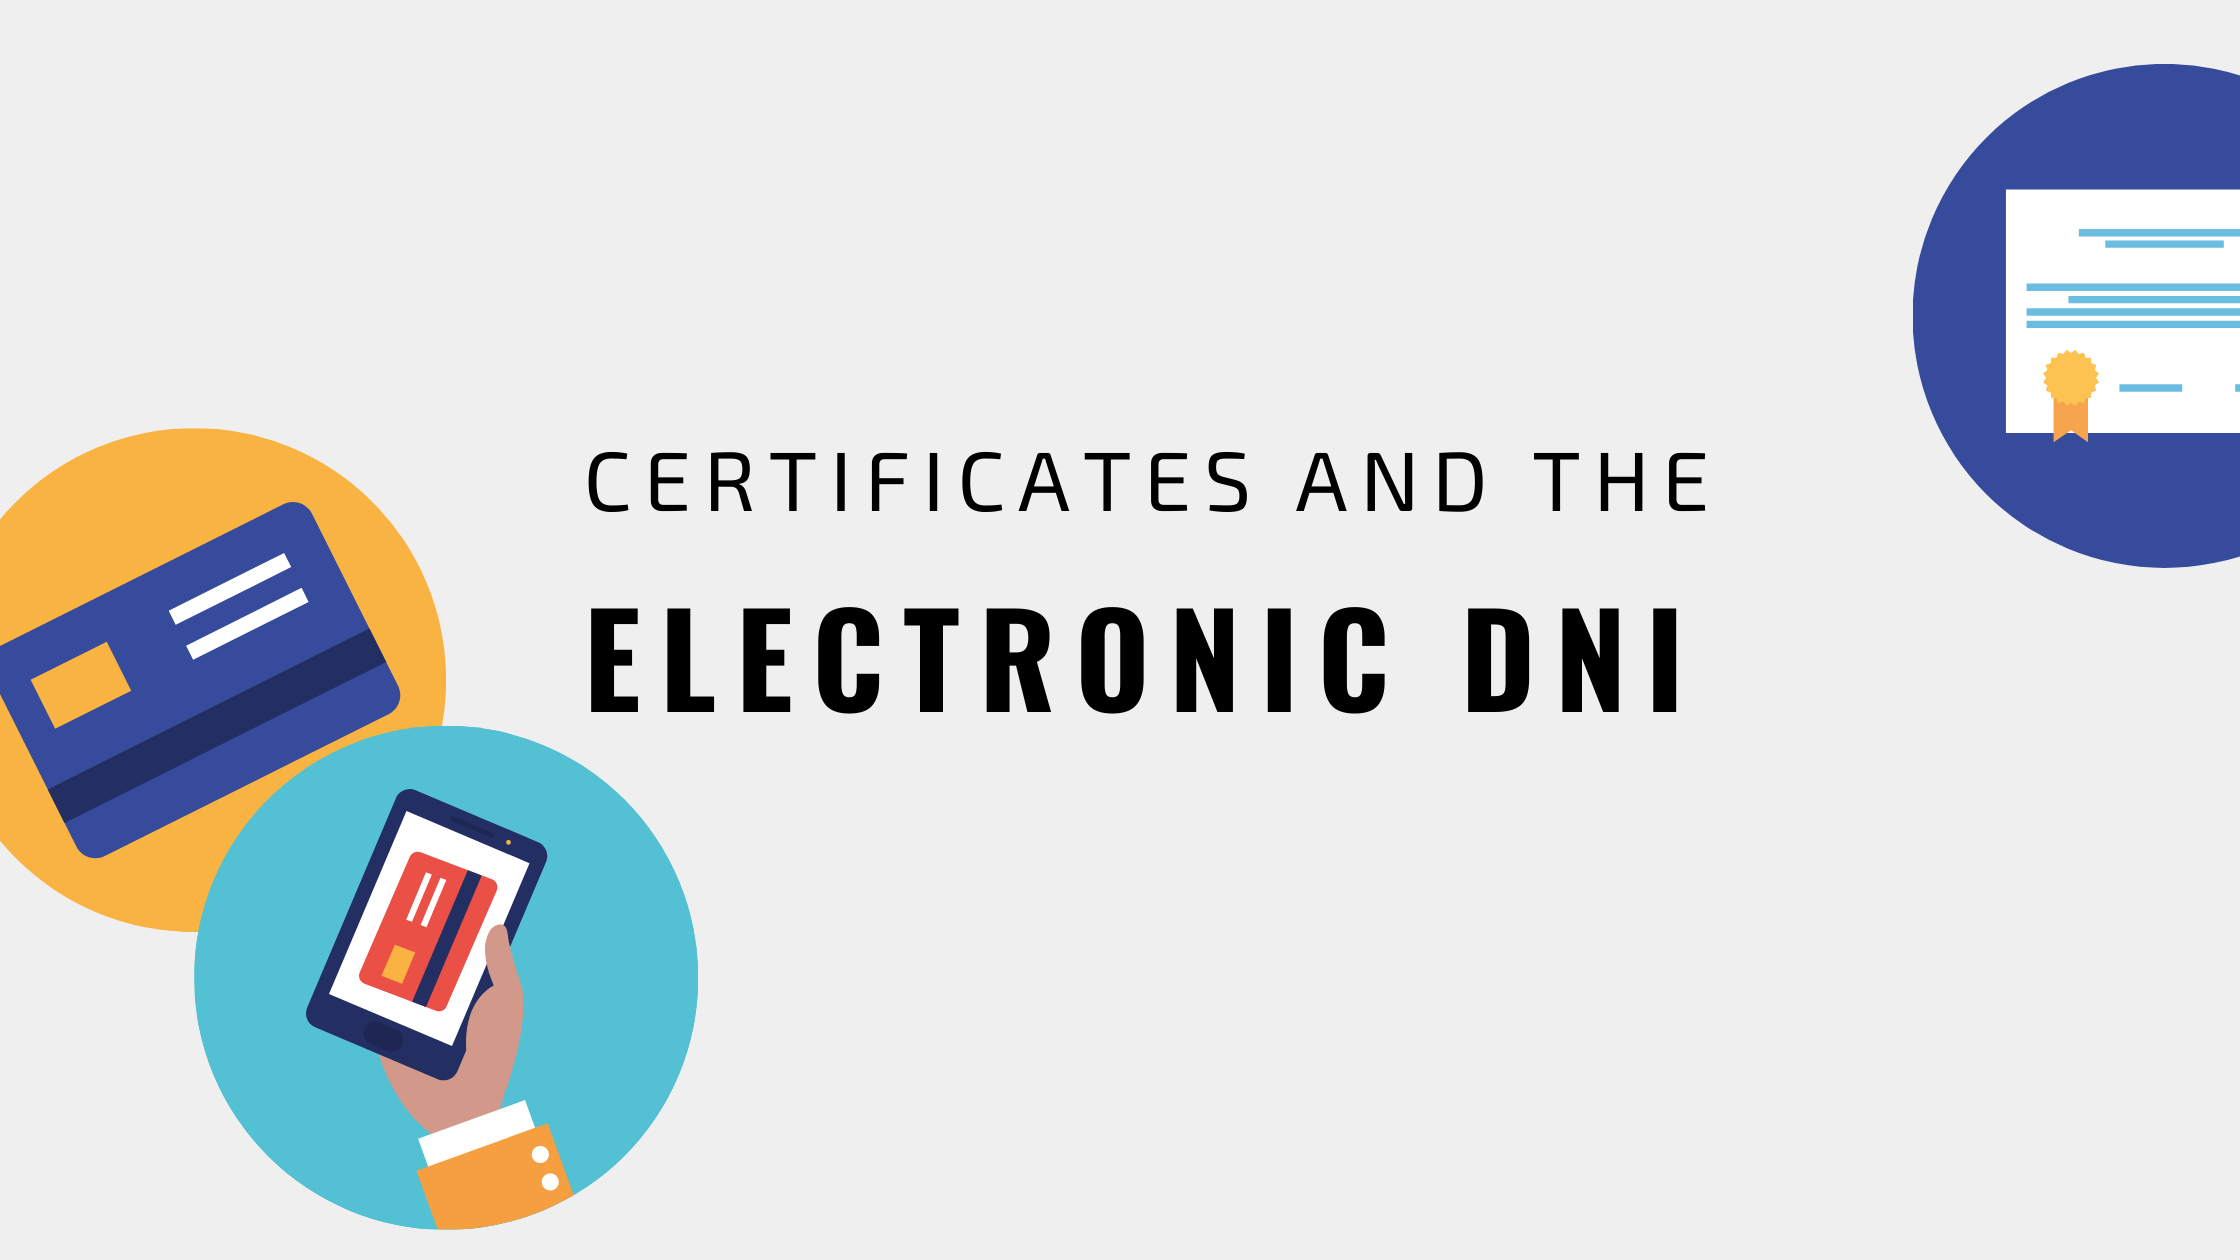 Certificates and electronic DNI